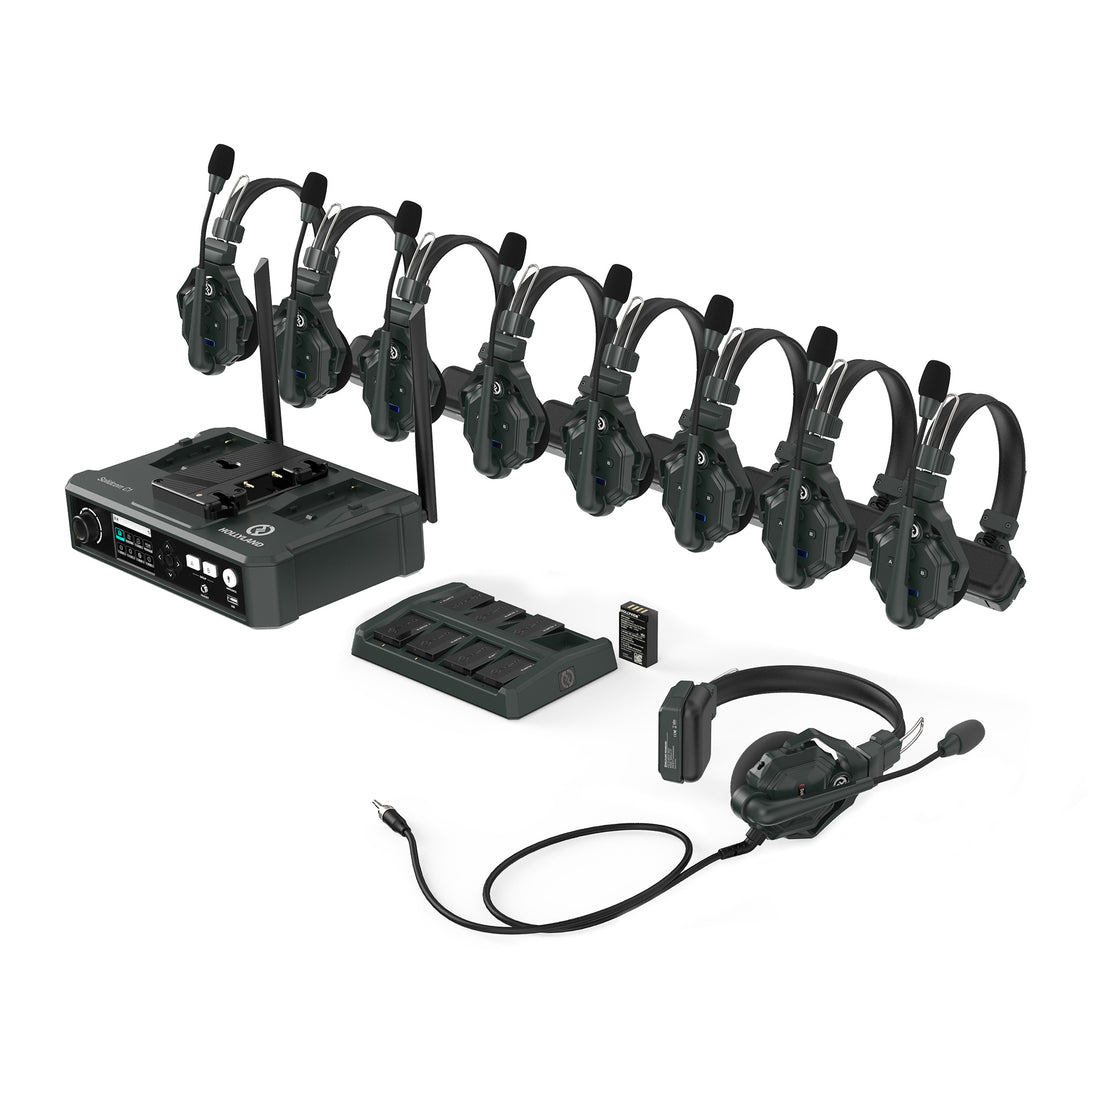 Hollyland Solidcom C1-8S Full-Duplex Wireless DECT Intercom System with 8  Headsets (1.9 GHz)